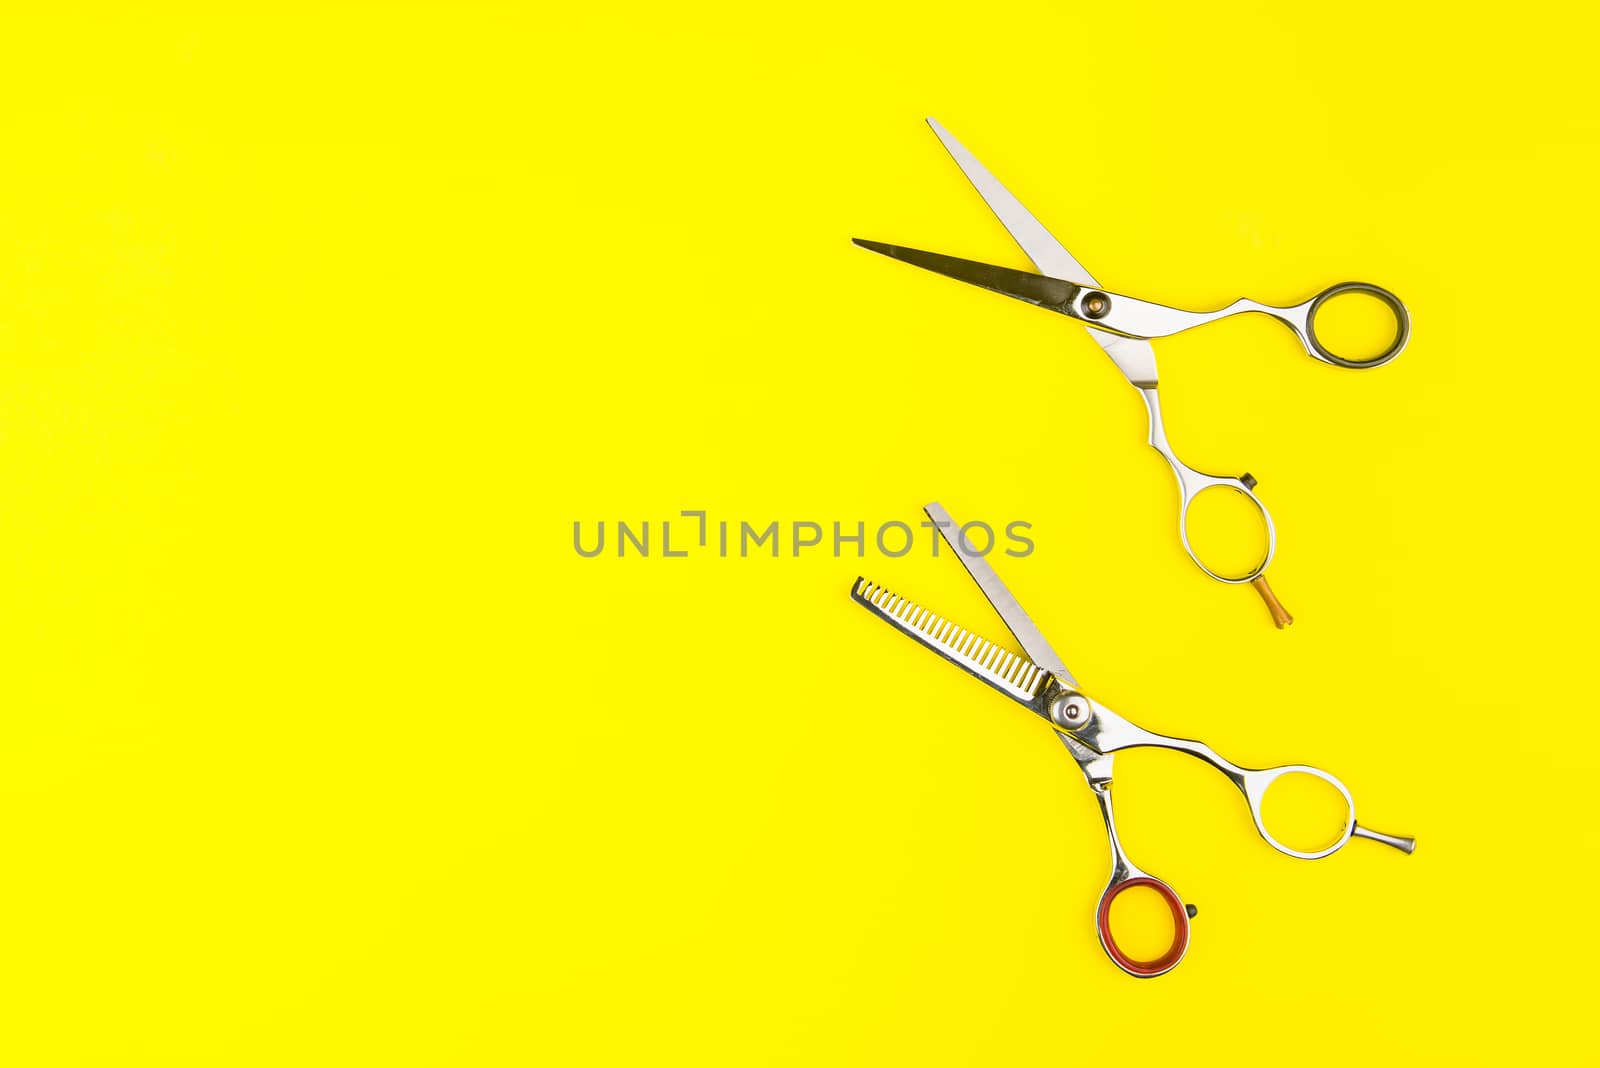 Stylish Professional Barber Scissors on yellow background. Hairdresser salon concept, Hairdressing Set. Haircut accessories. Copy space image, flat lay